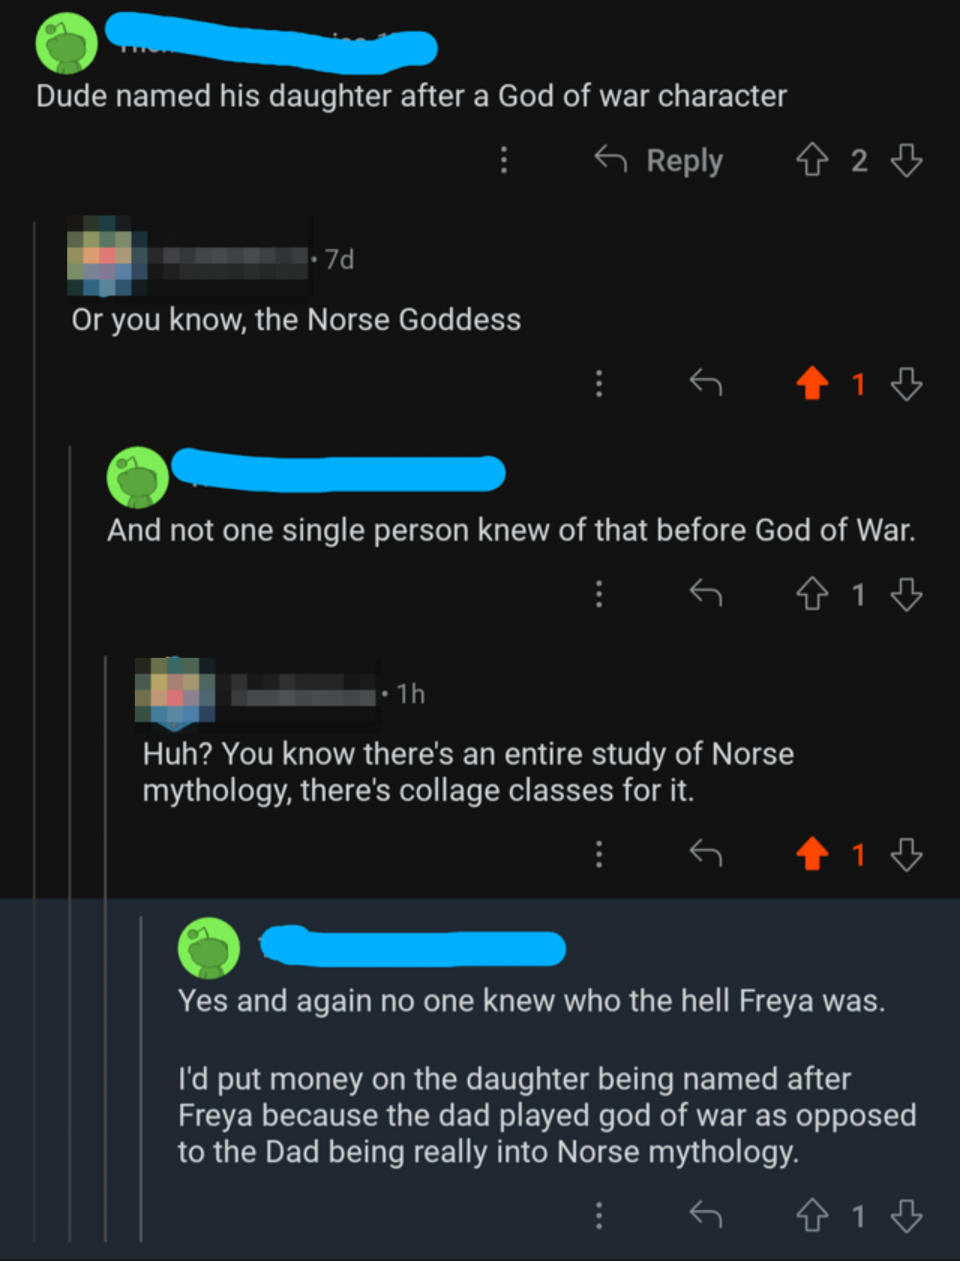 Someone makes fun of a father for naming his daughter after a God of War character, a responder points out Freya is from Norse mythology, and the first person says "not a single person knew that before God of War"